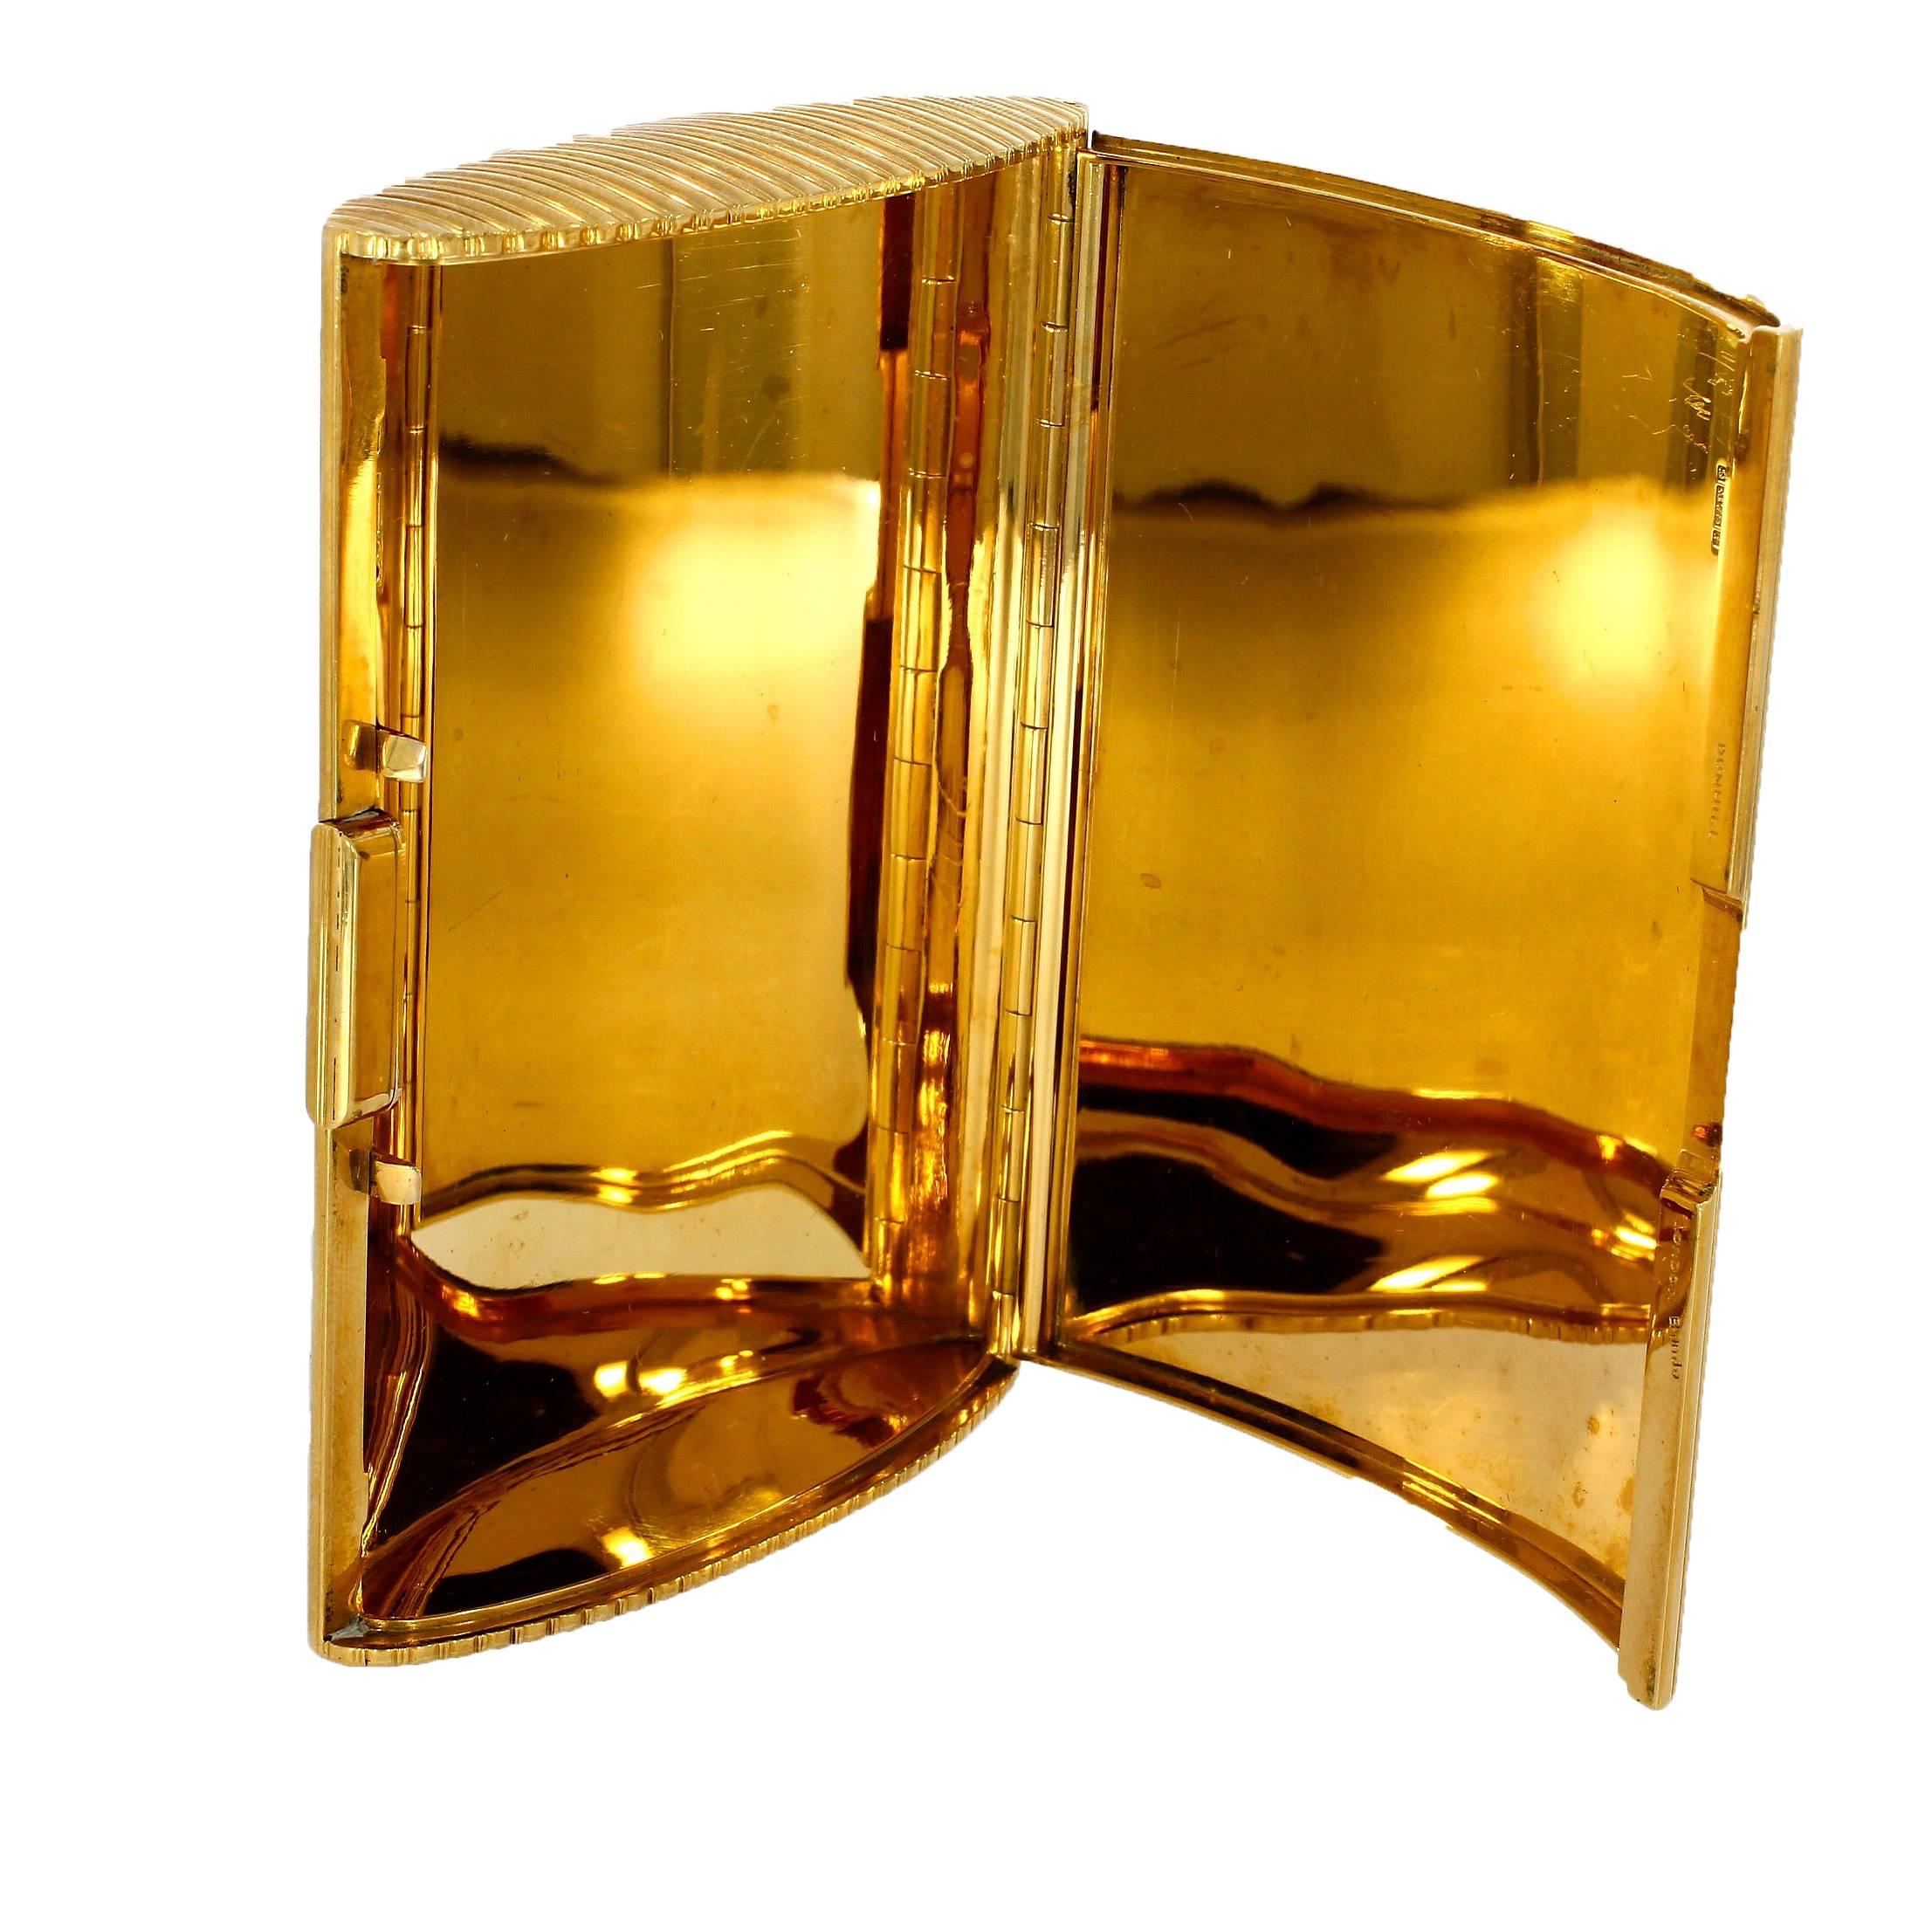 Dunhill Yellow Gold Cigarette Case In Excellent Condition For Sale In Epsom, Surrey